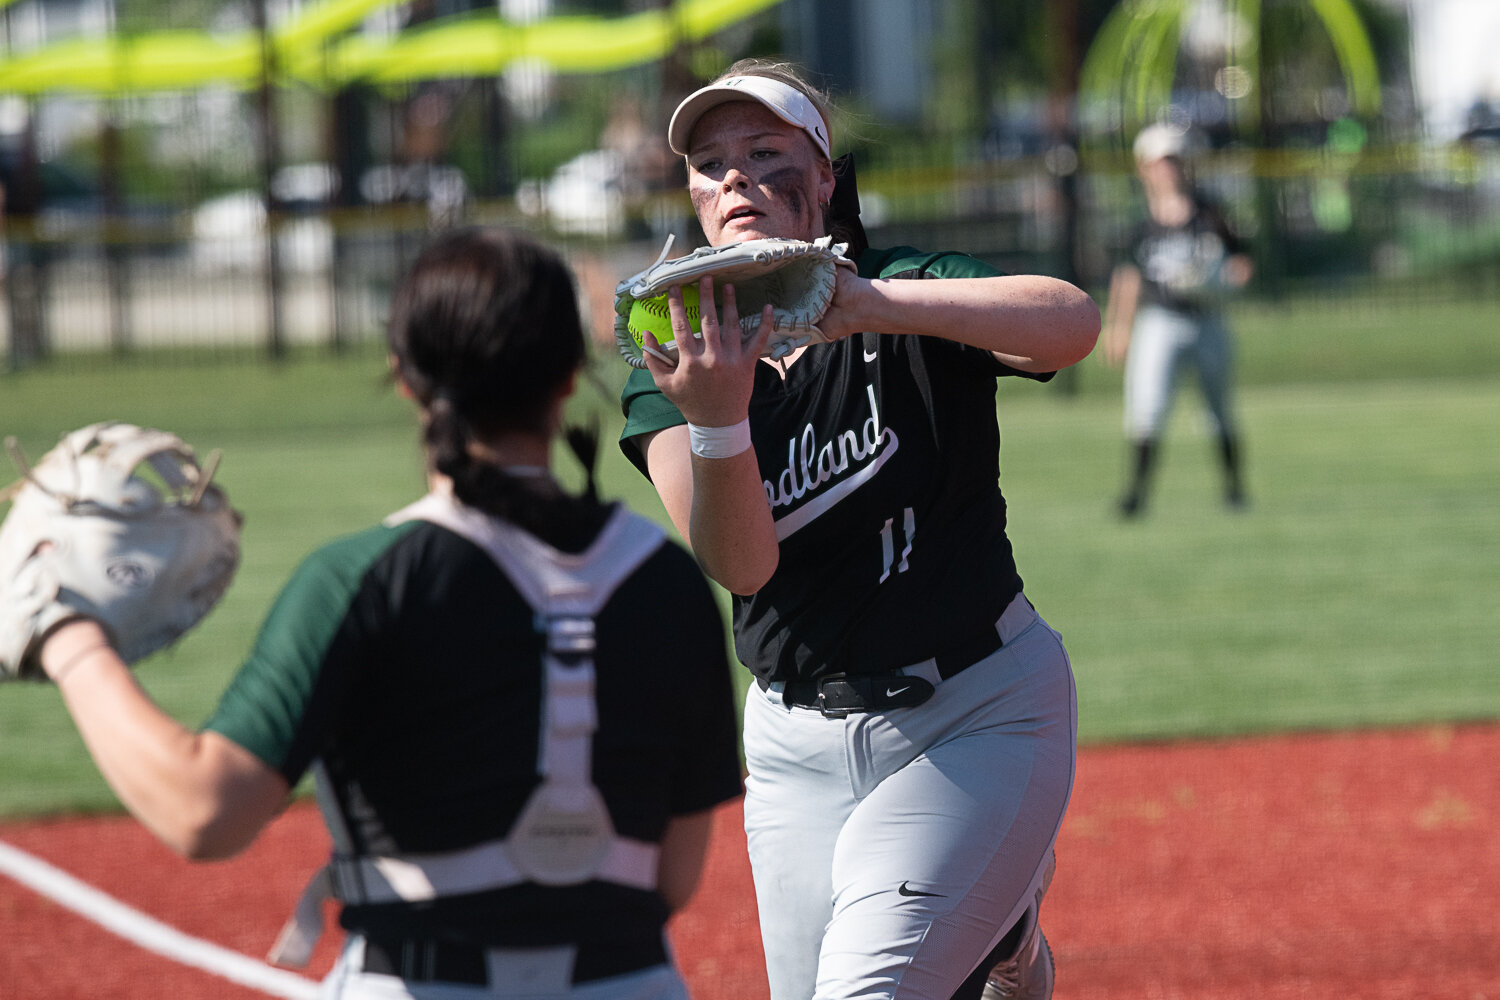 Woodland's Brynn Skelton catches a pop-up during the Beavers' 4-3 loss to Tumwater in the quarterfinals of the 2A District 4 tournament on May 18 at Rec Park in Chehalis.